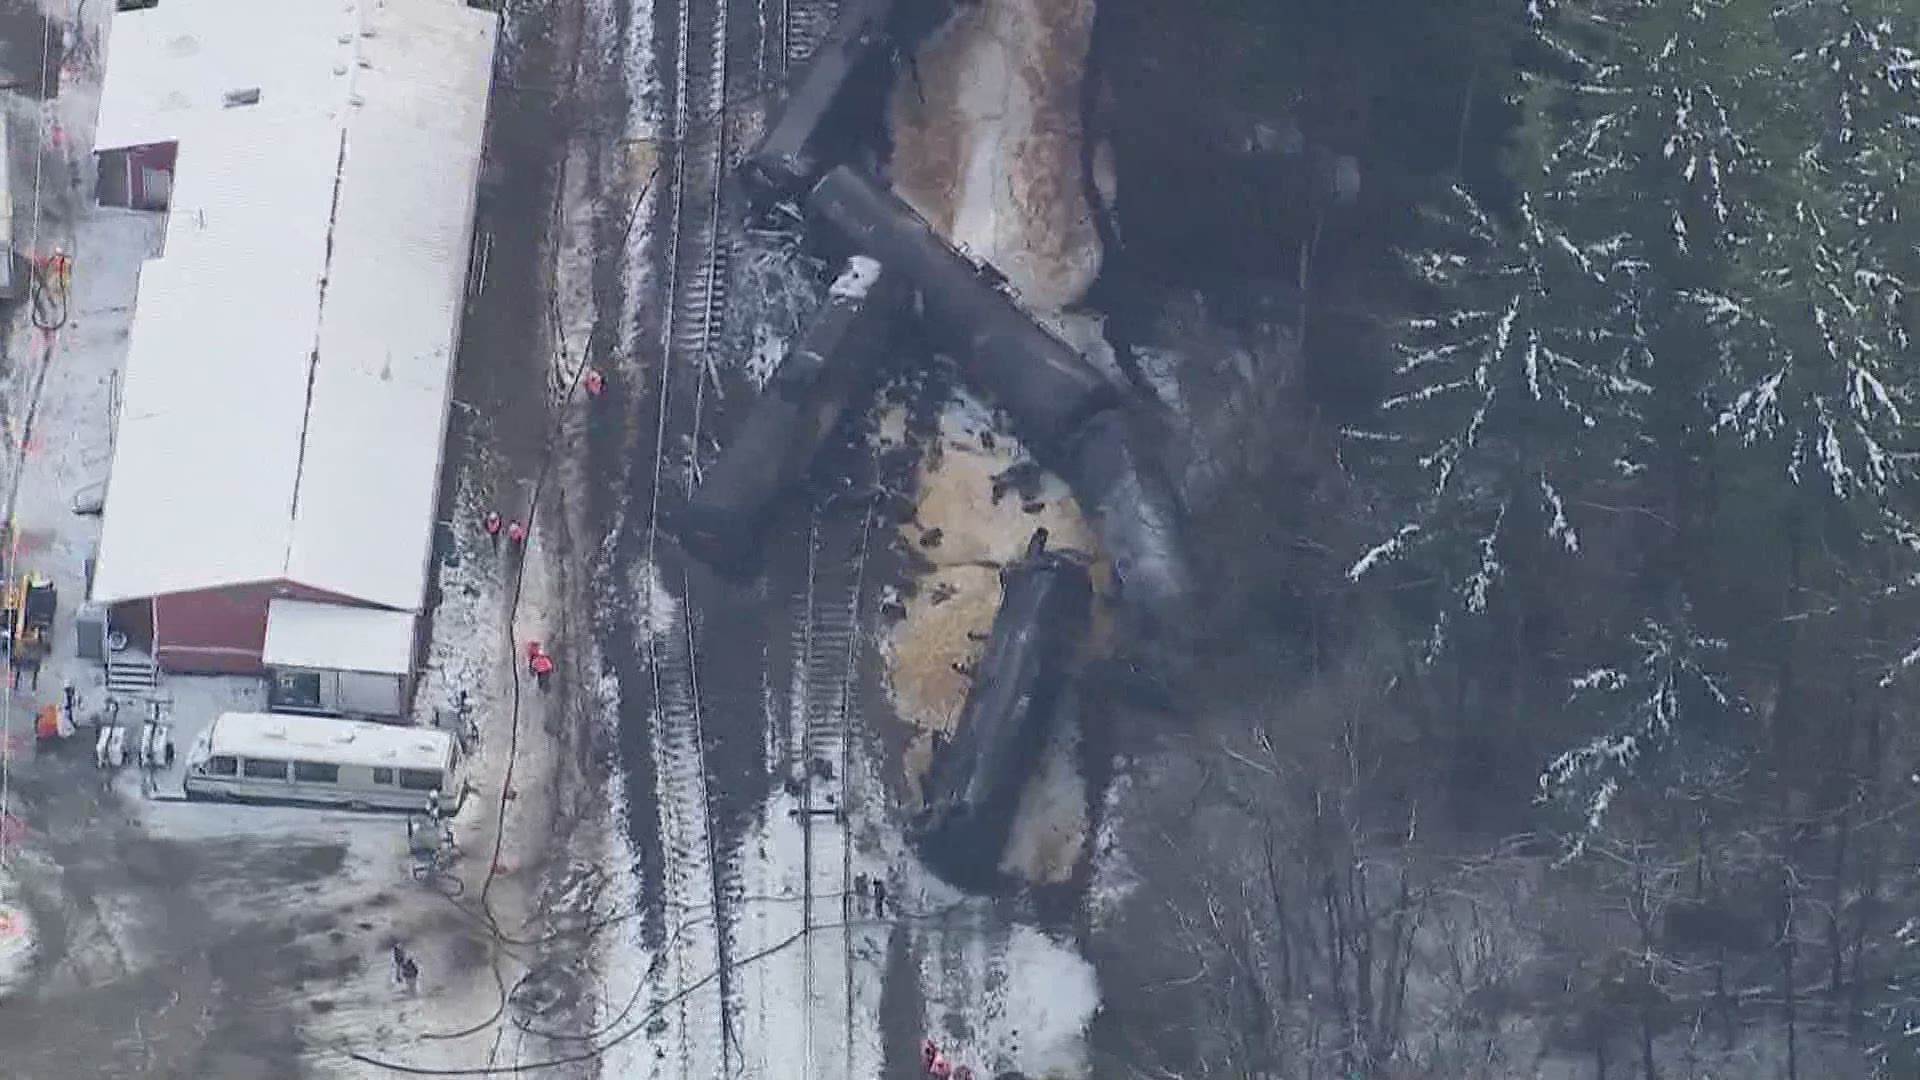 Railroad employees reportedly told Senator Doug Erickson they believe the tracks were sabotaged. Now Erickson is calling for state Senate hearings on the incident.